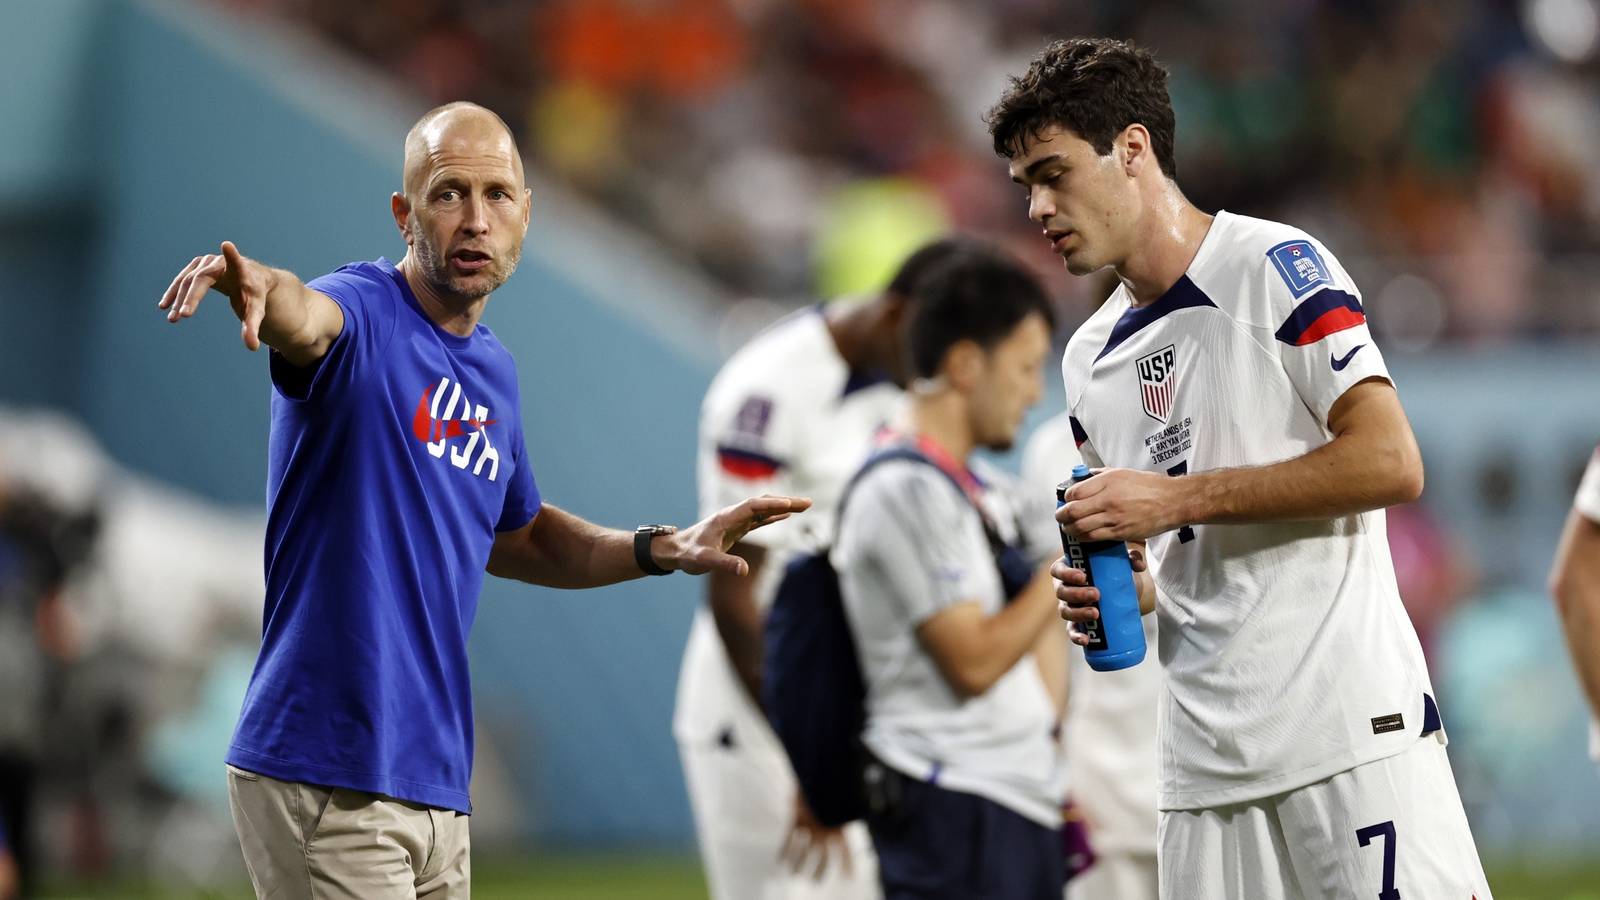 Probe clears Berhalter to reapply for USA coaching job